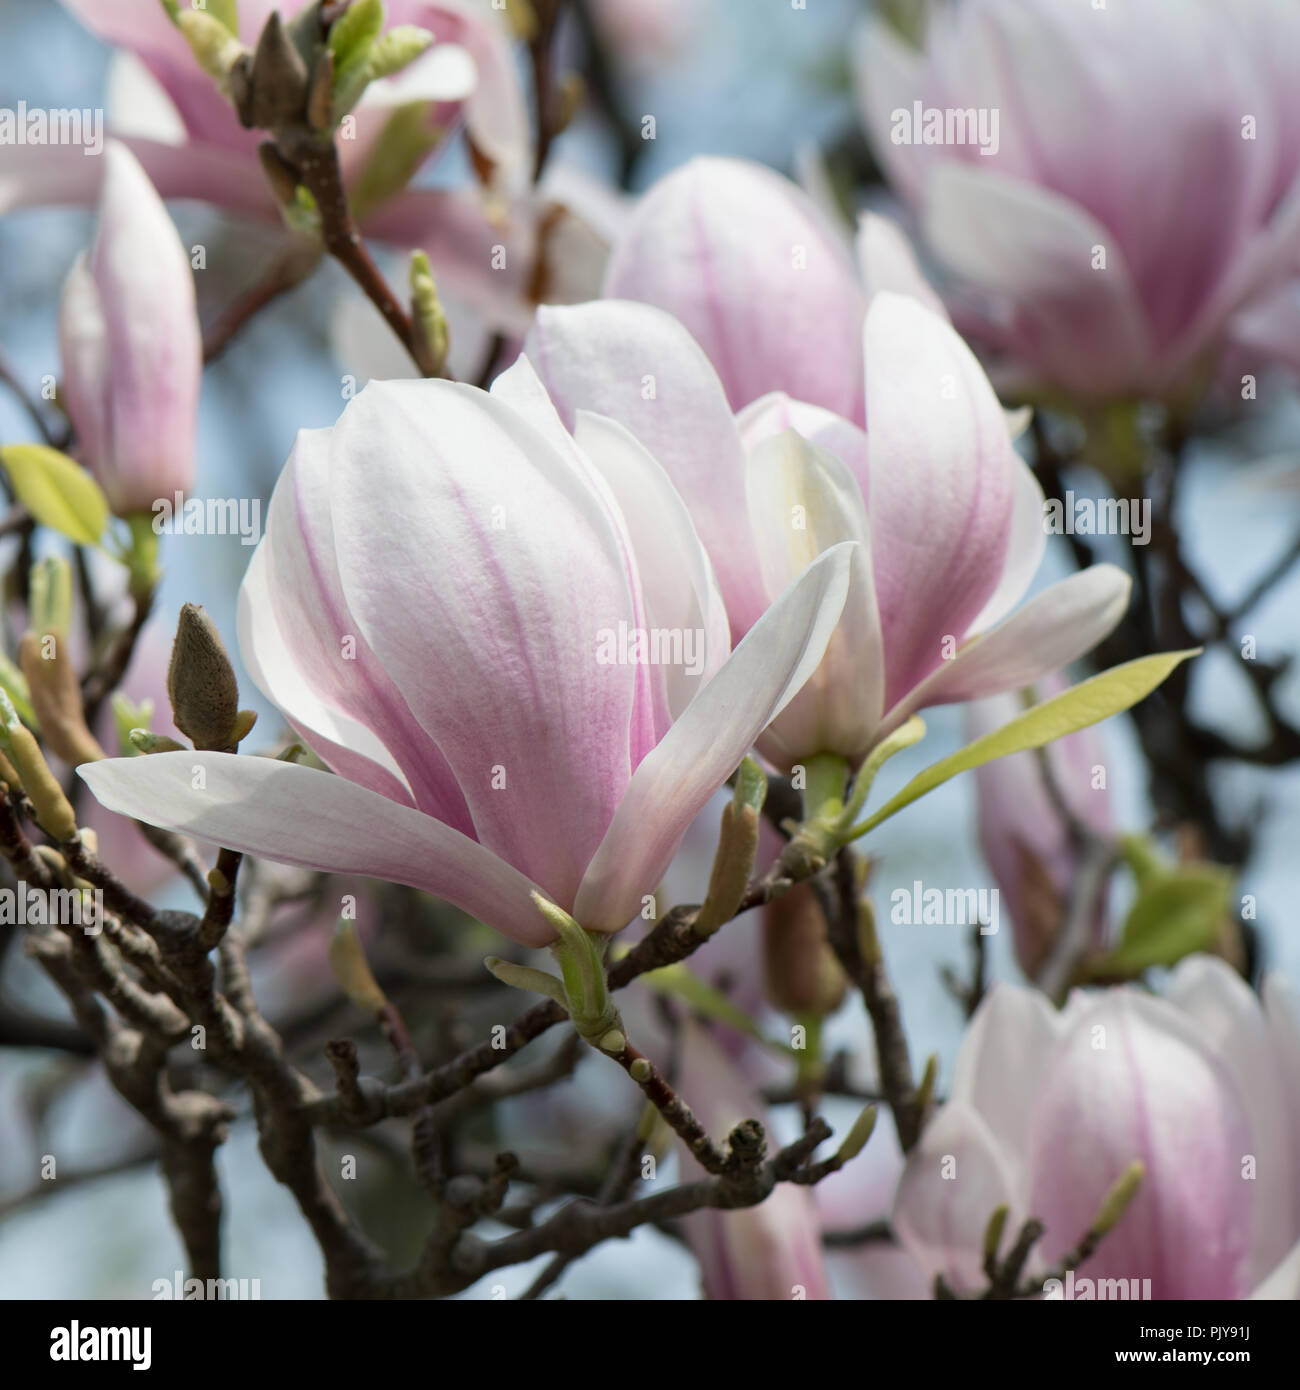 Macro Of The Pink And Purple Blossoms Of The Pink Magnolia Tree Stock Photo